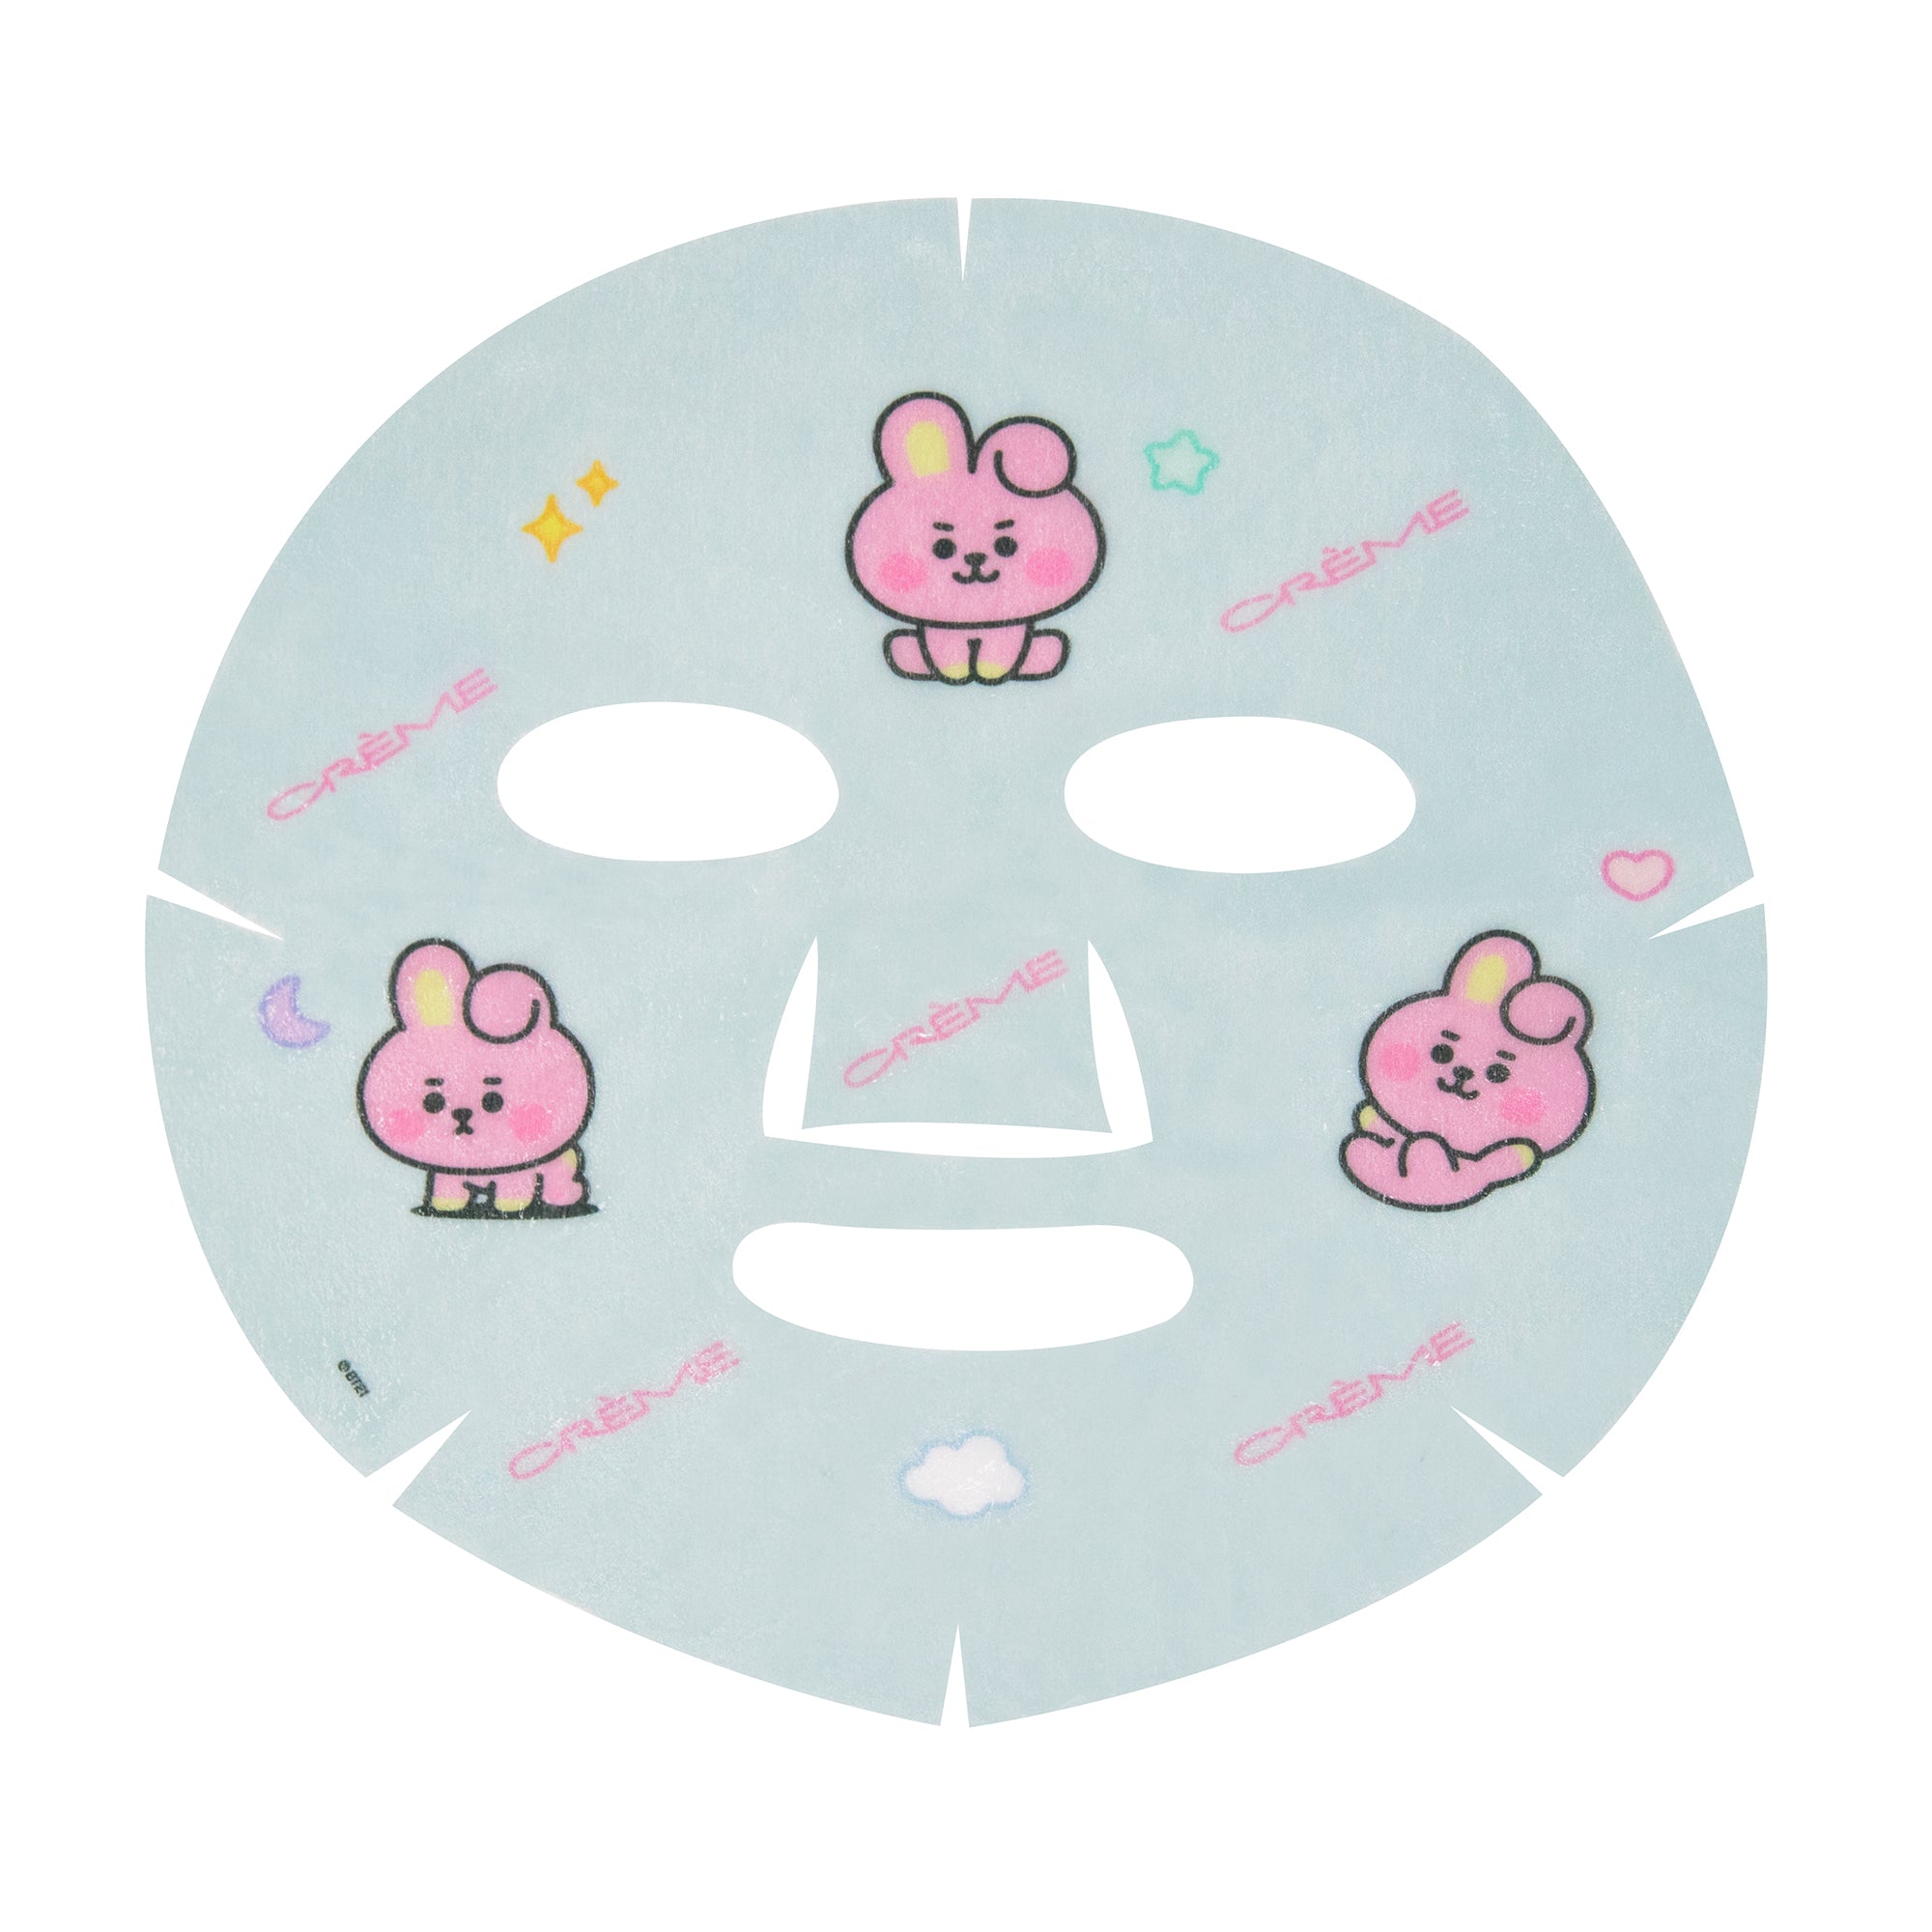 FLAWLESS Like Baby COOKY Printed Essence Sheet Mask (Squalane, Xylitol, Peach Ceramides) Sheet masks The Crème Shop x BT21 BABY 